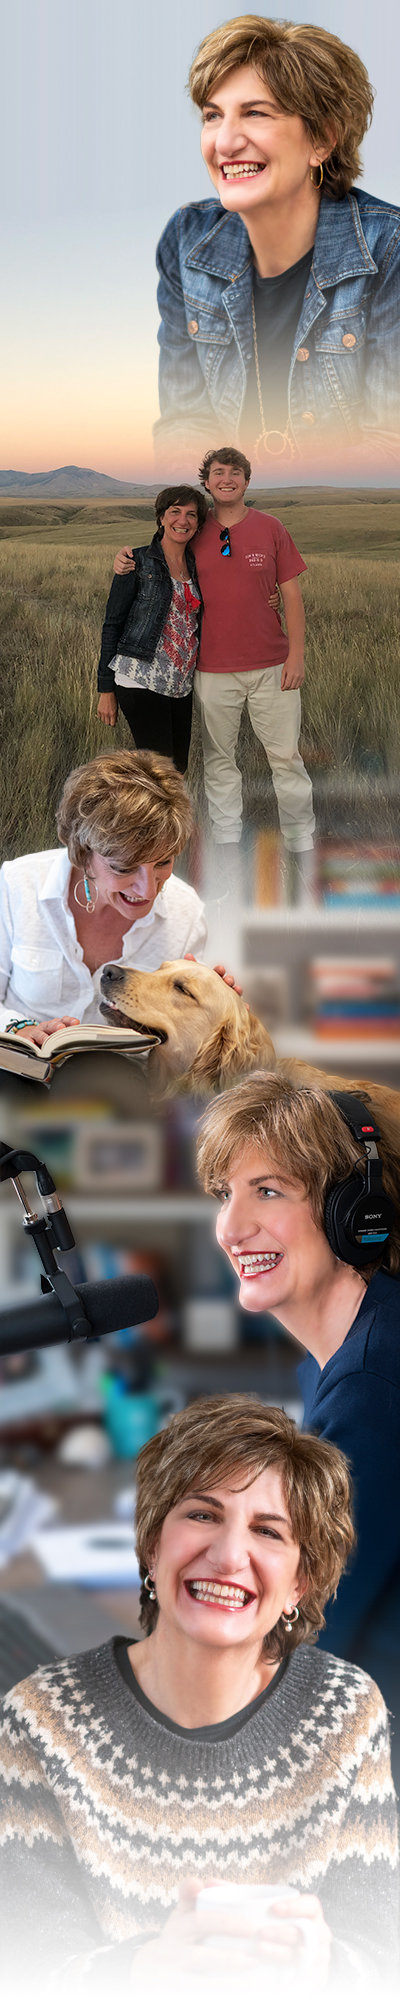 Collage of Karen J. Hardwick with her dog, son, and speaking into a microphone